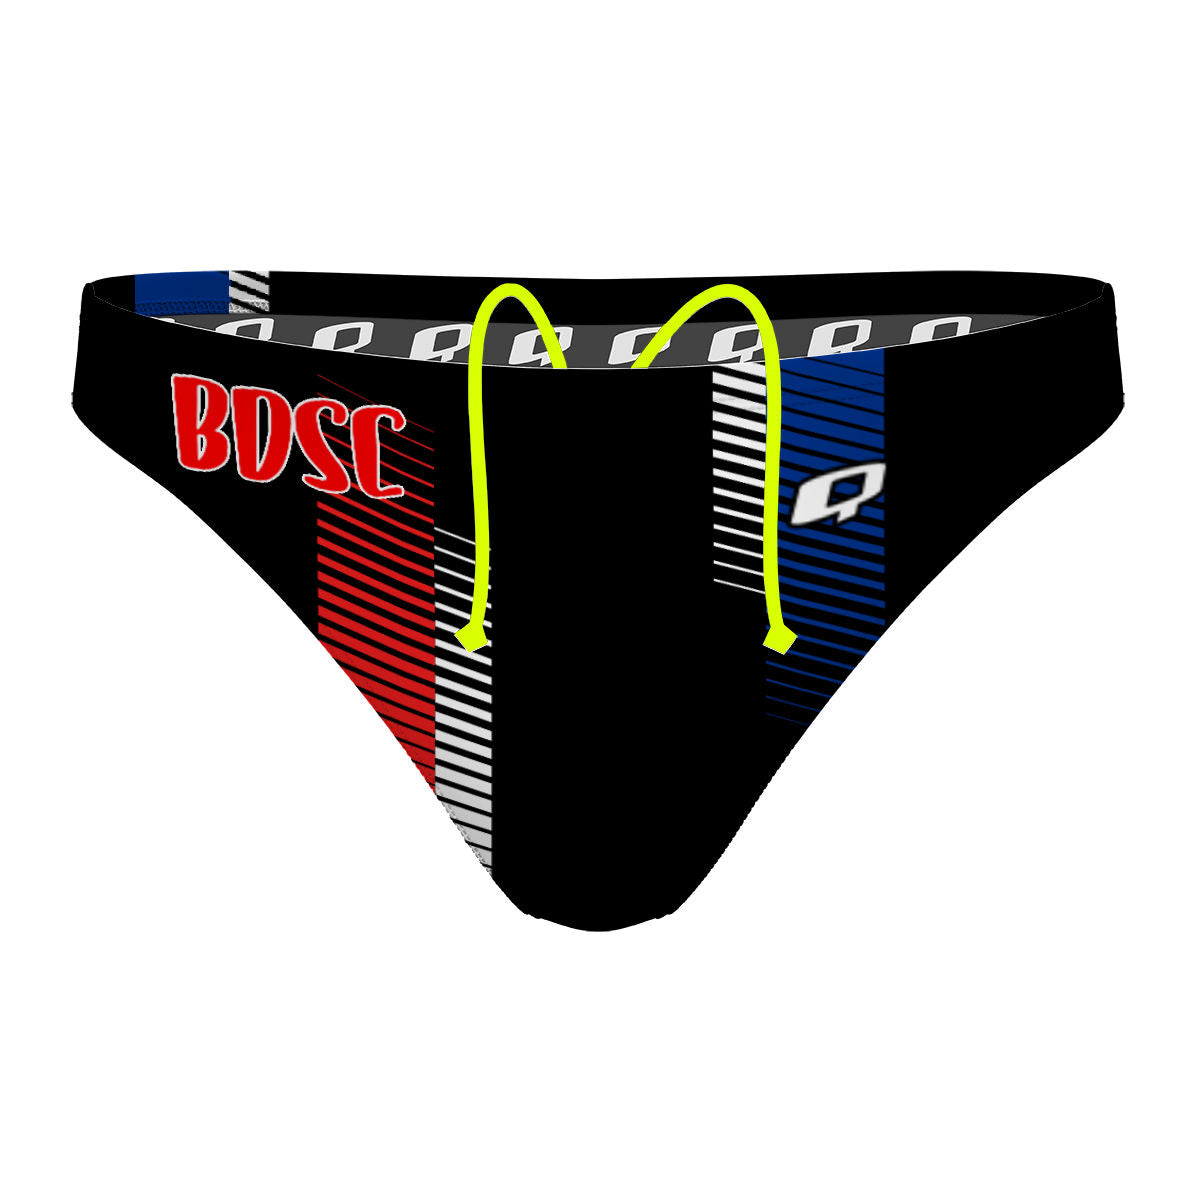 BDSC - Waterpolo Brief Swimsuit